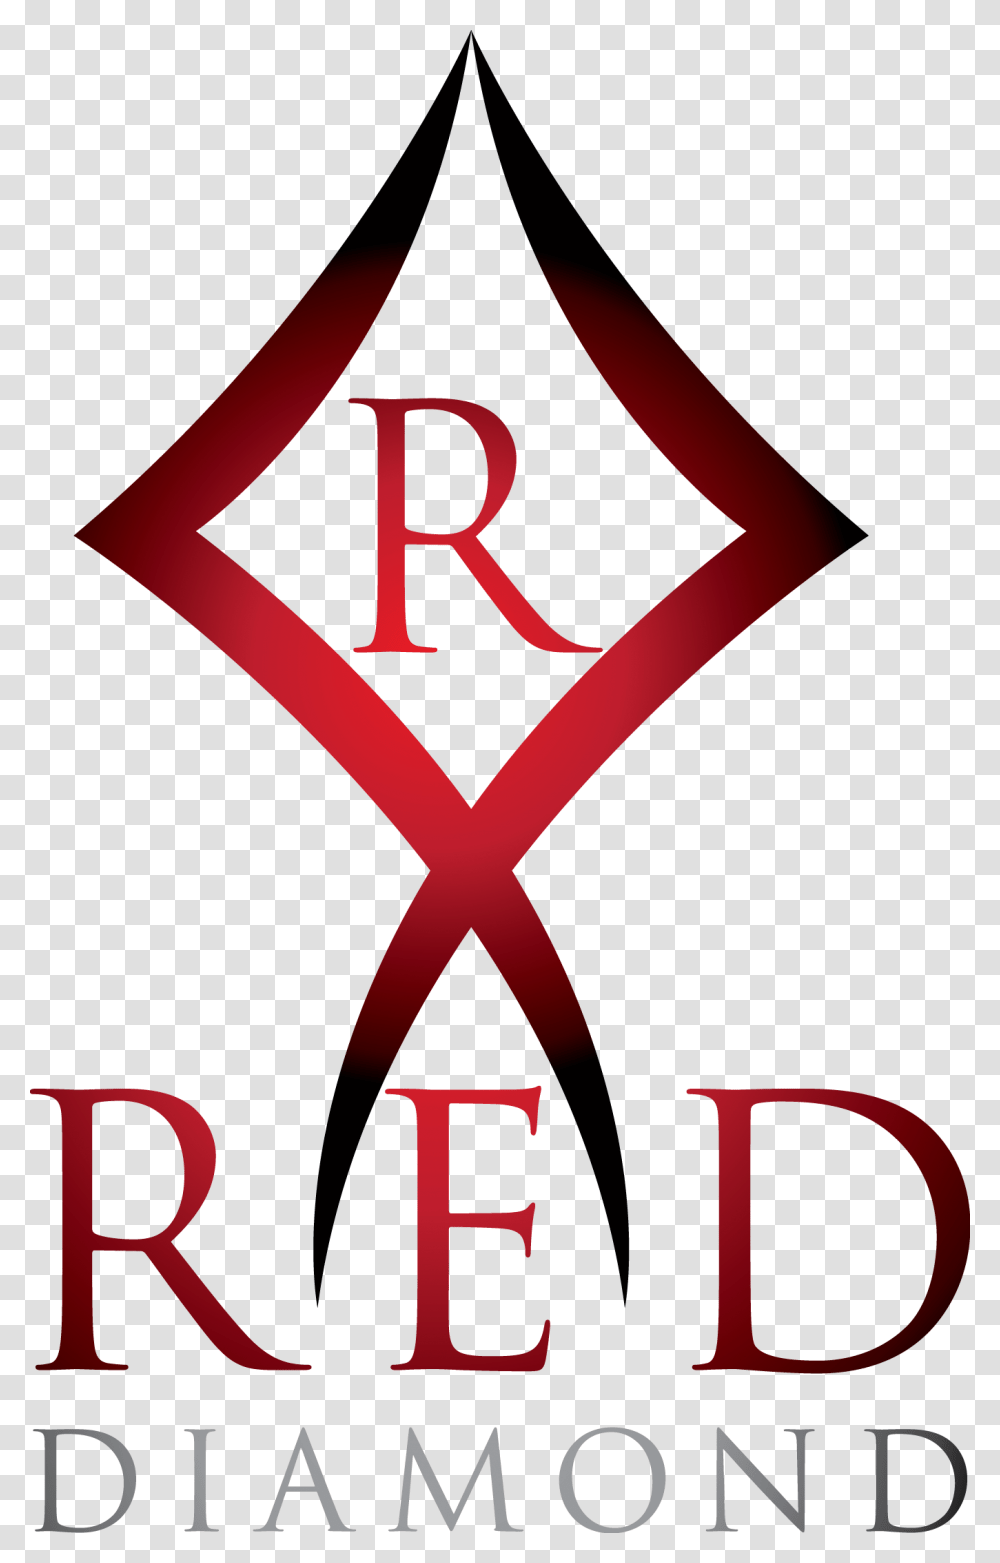 Red Diamond Auctions Owned And Operated By Kevin Perry Precision Medicine Group, Cross, Tie, Accessories Transparent Png